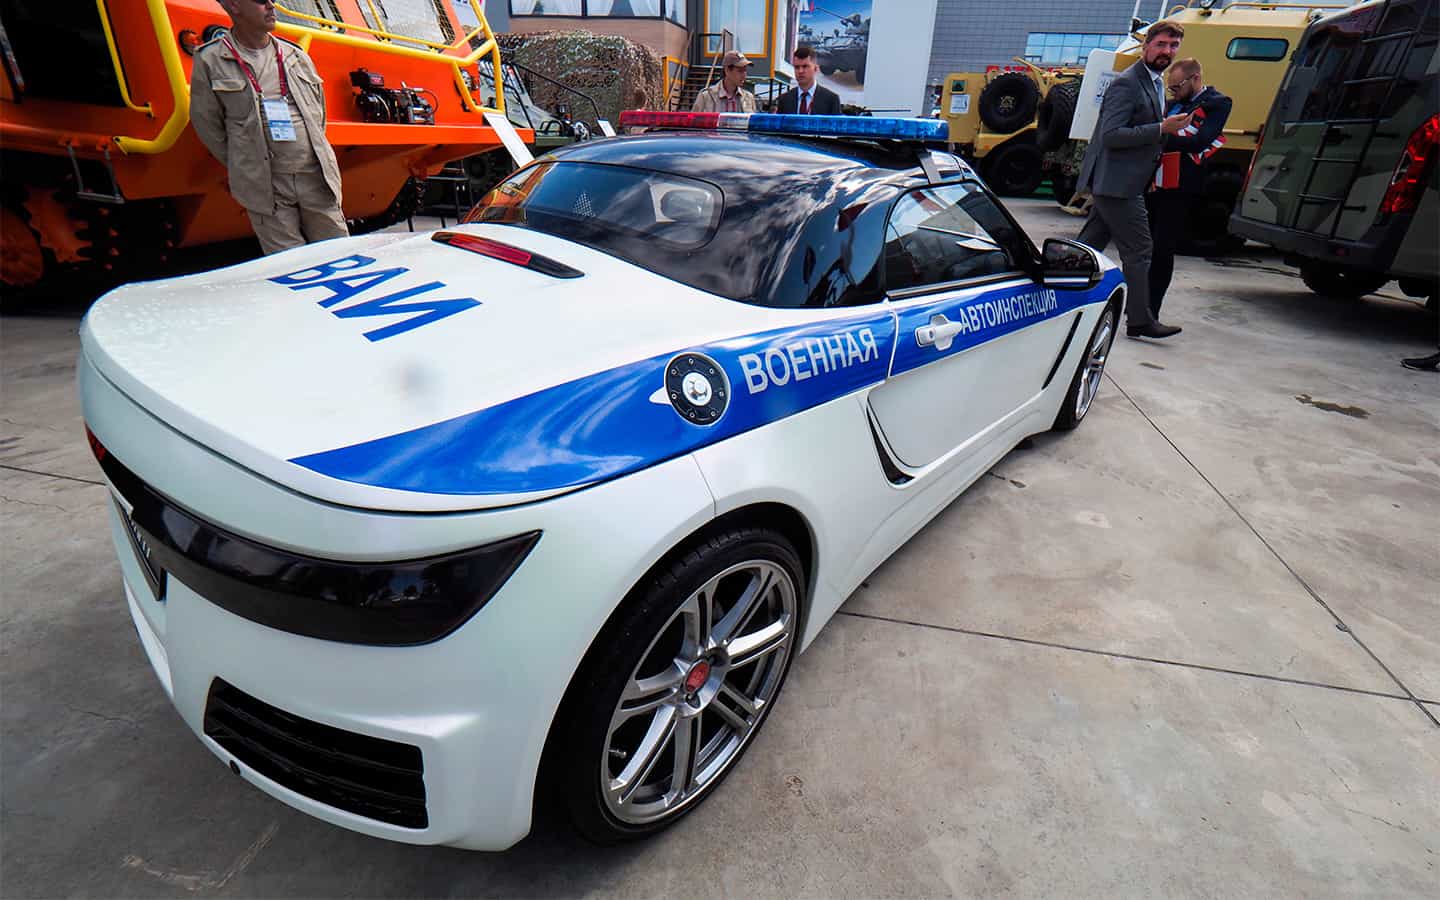 A high-speed roadster for the police has been created in Russia. Photo